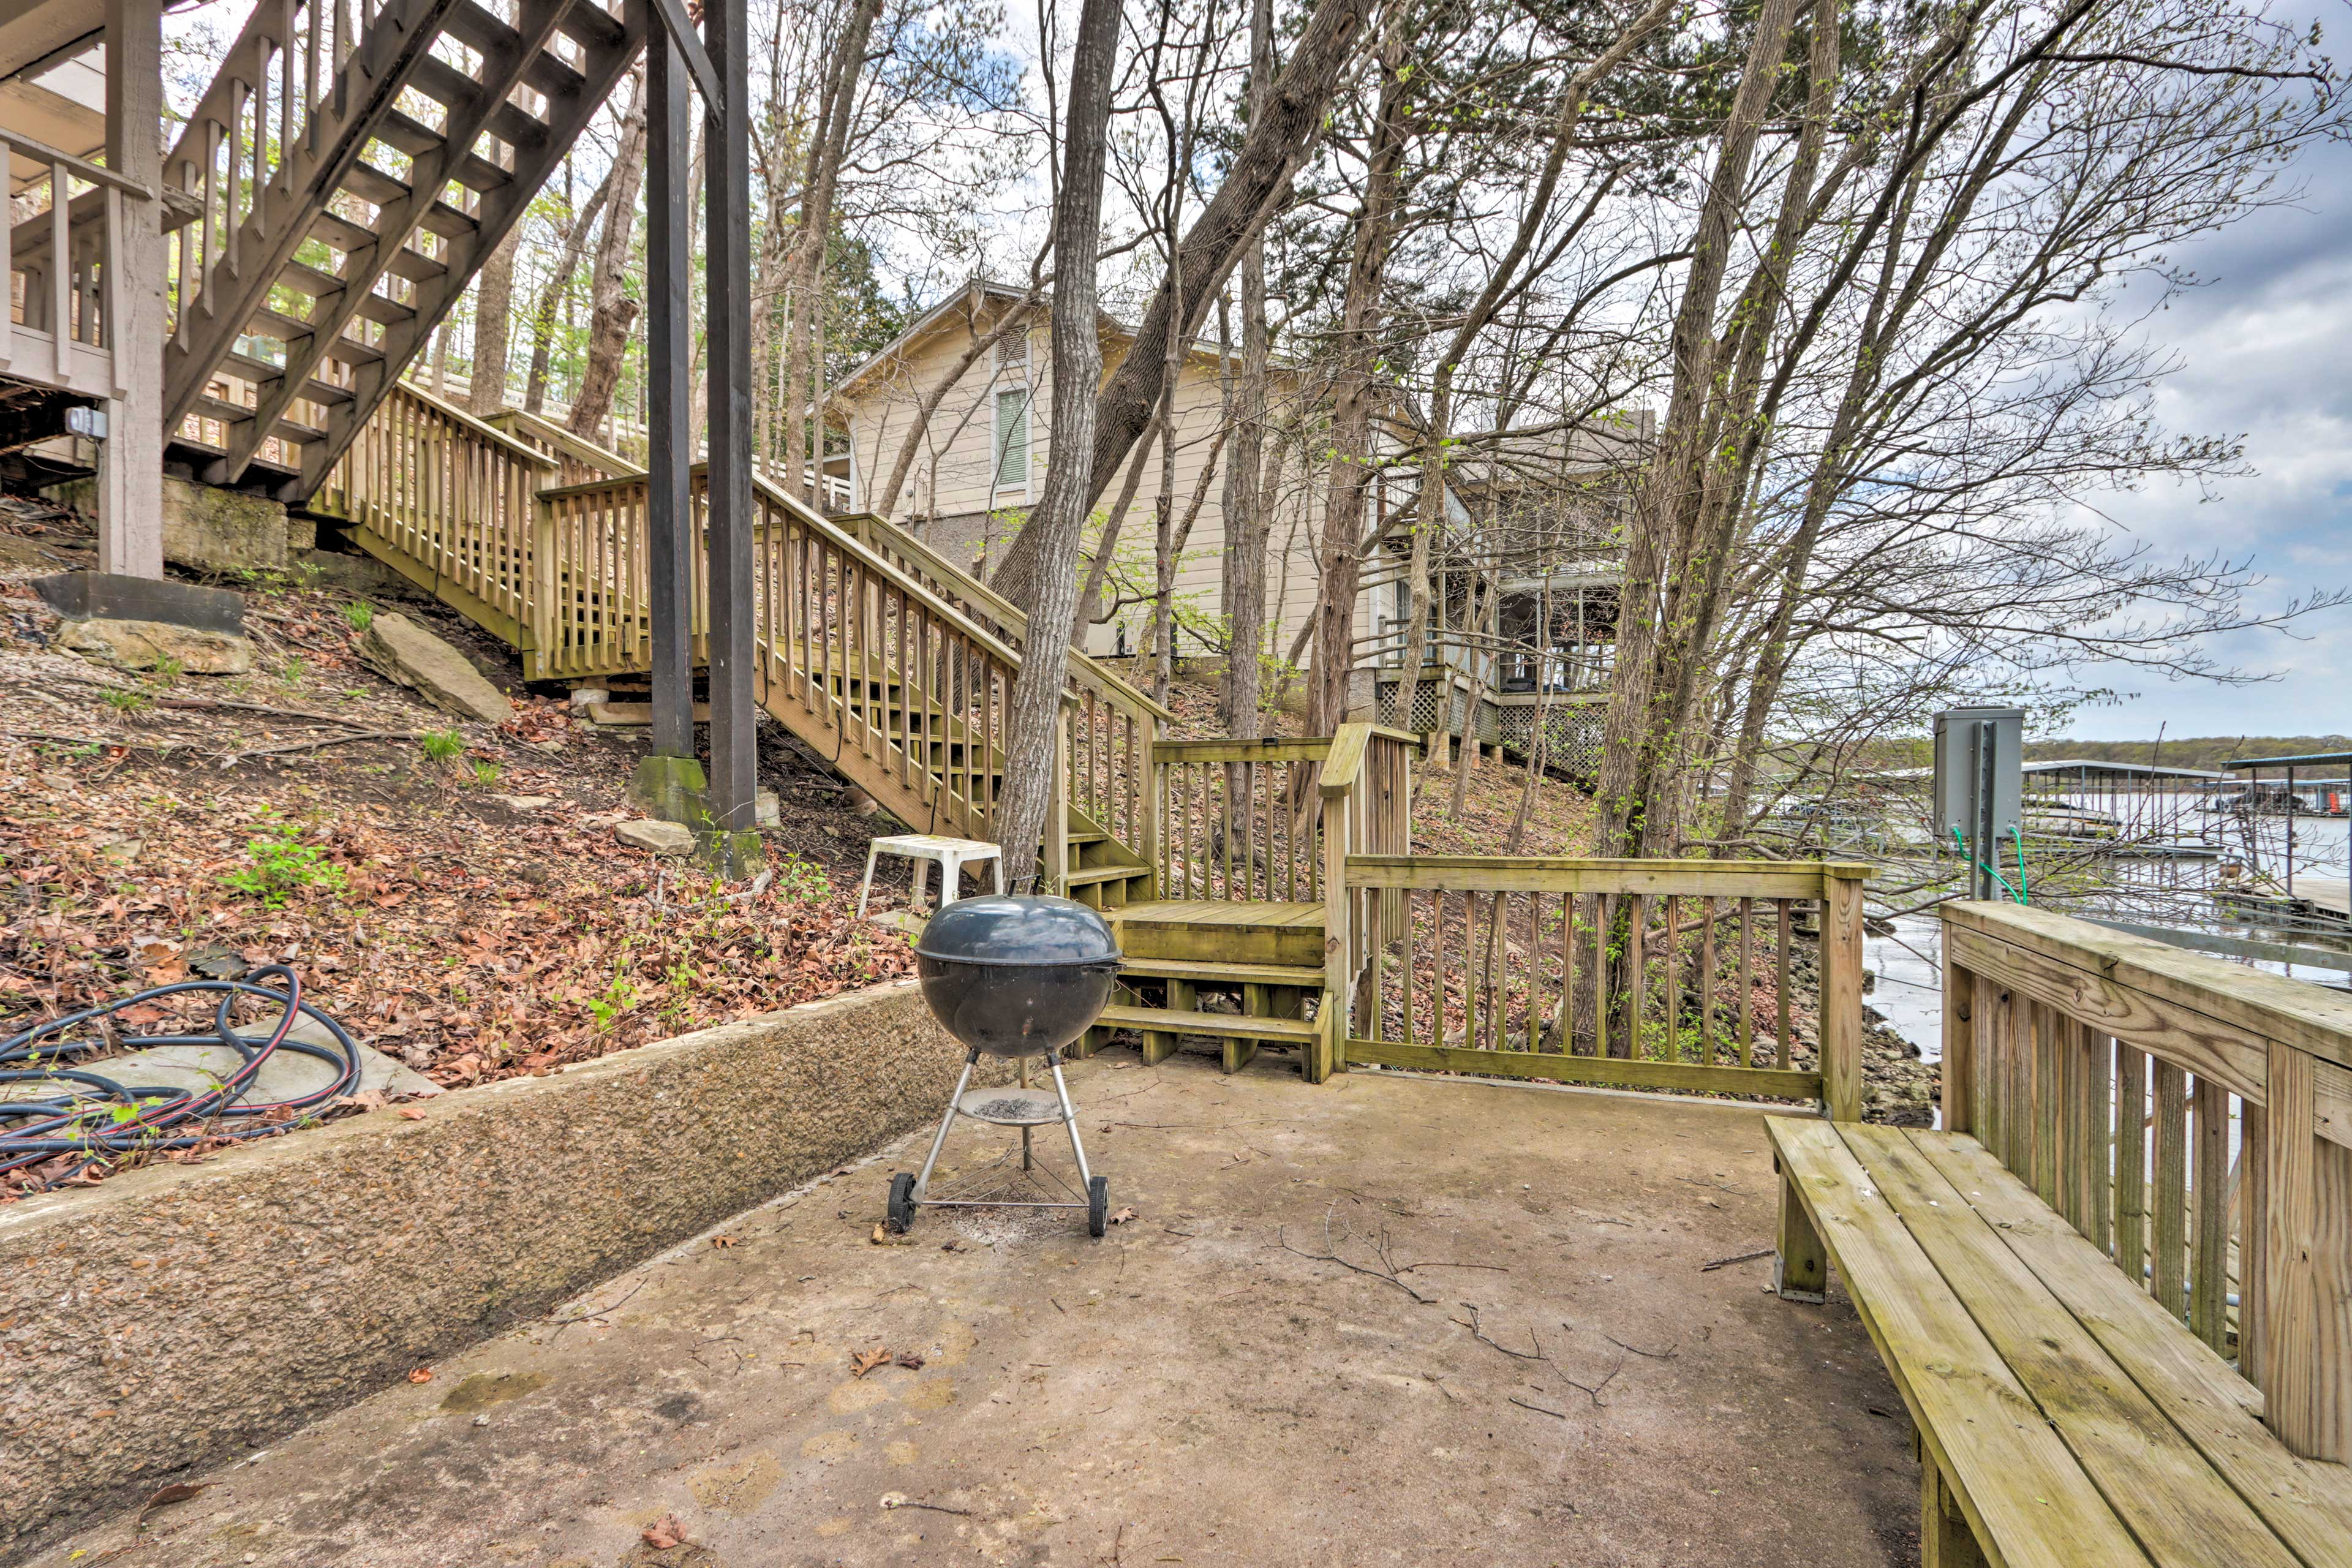 Lakefront Patio | Charcoal Grill | Stairs to Access